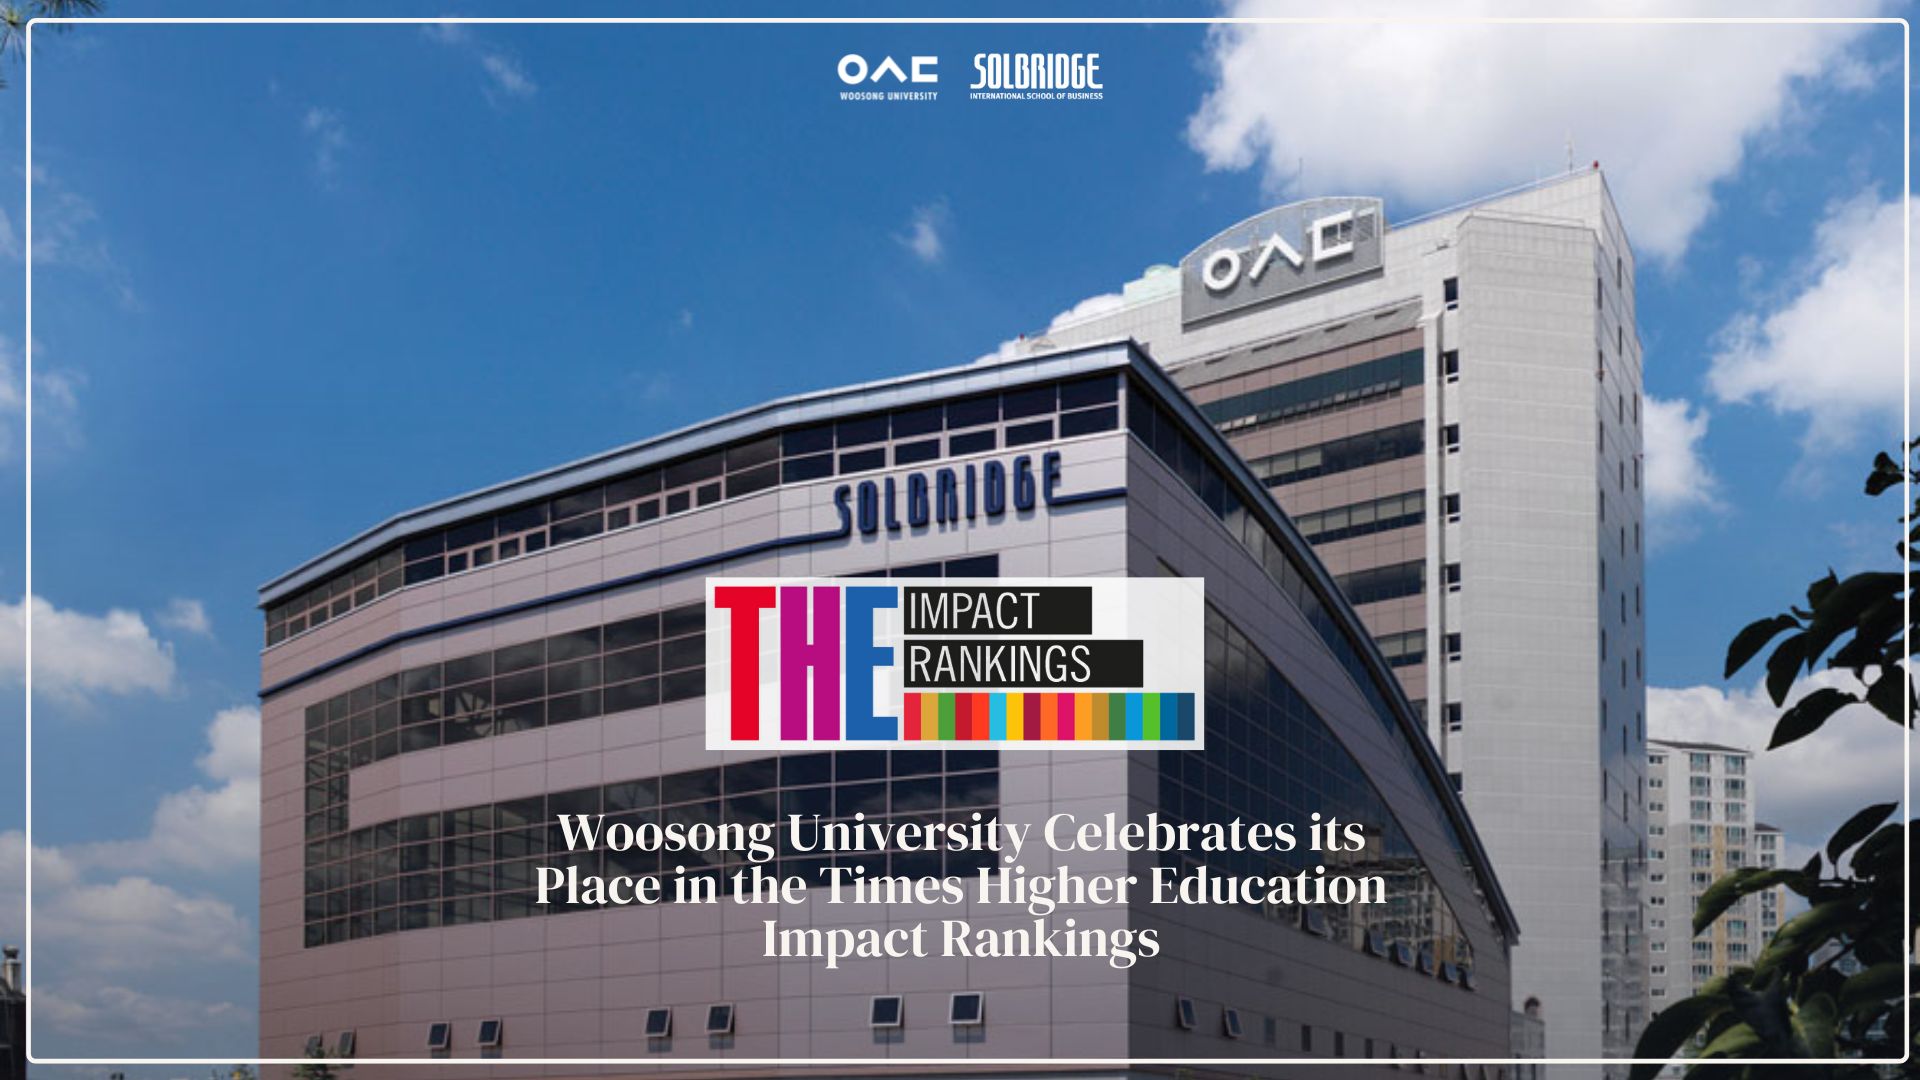 Woosong University Celebrates its Place in the Times Higher Education Impact Rankings